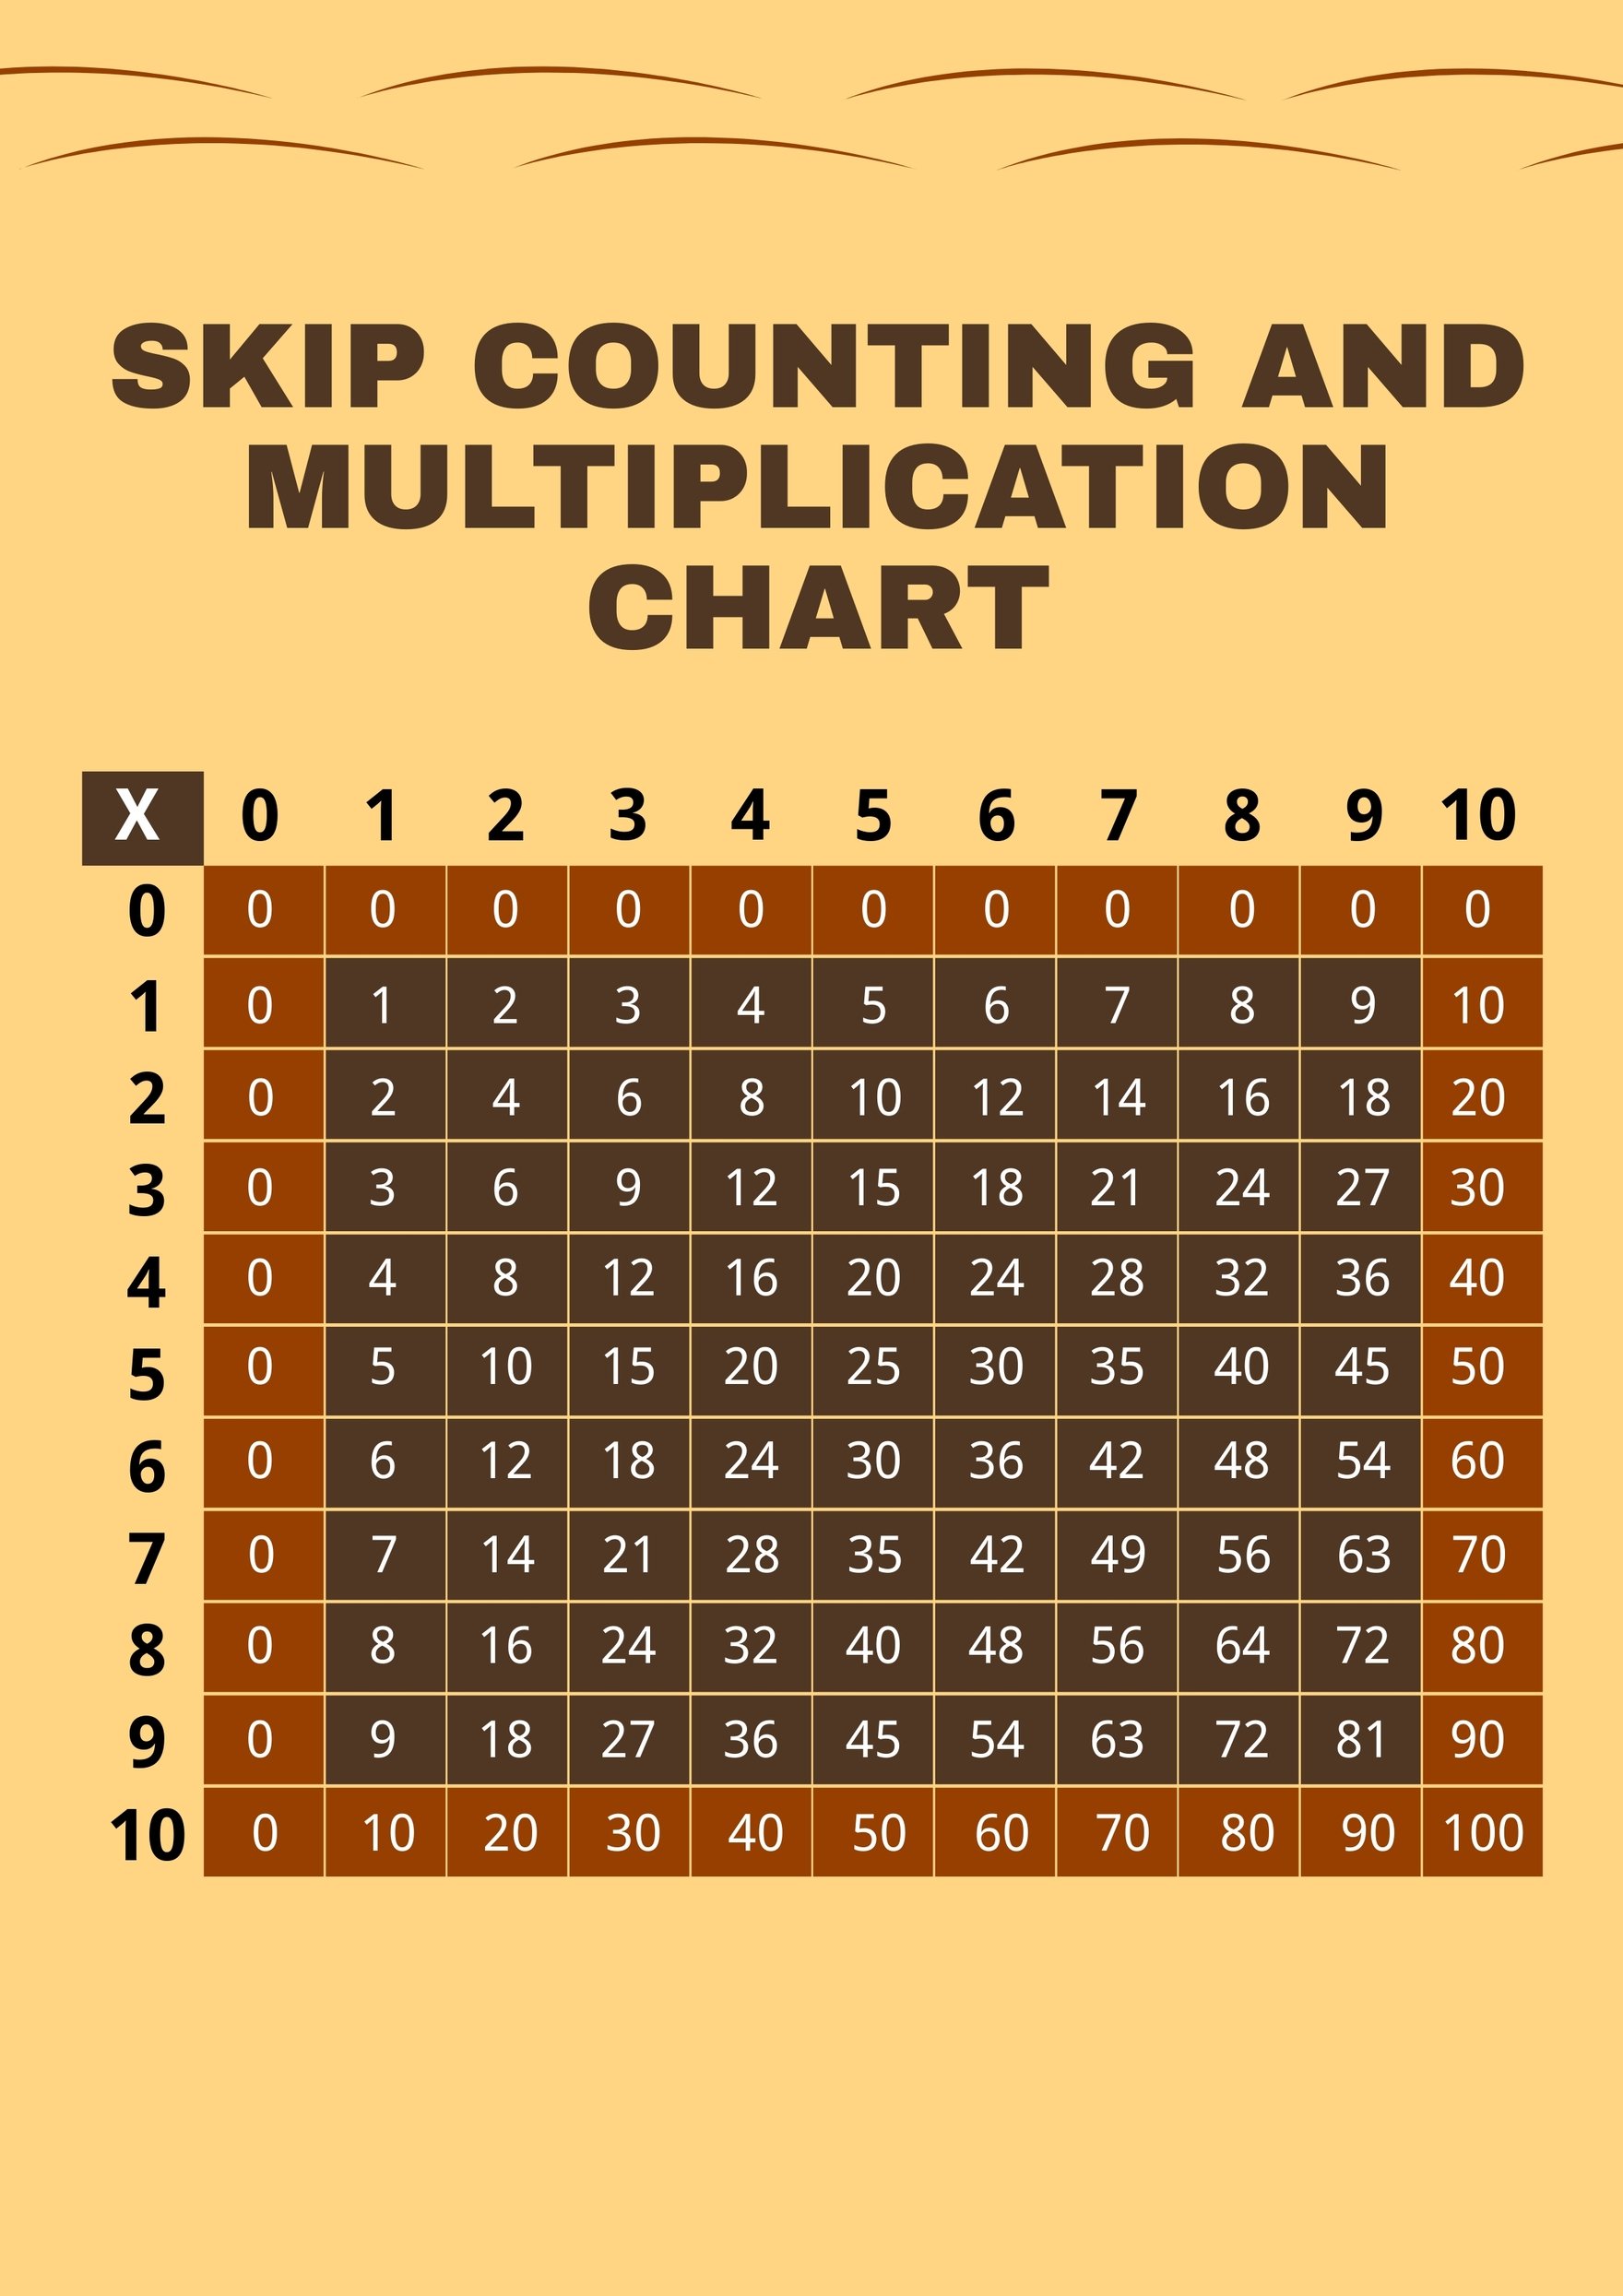 Skip Counting And Multiplication Chart Template in PDF, Illustrator